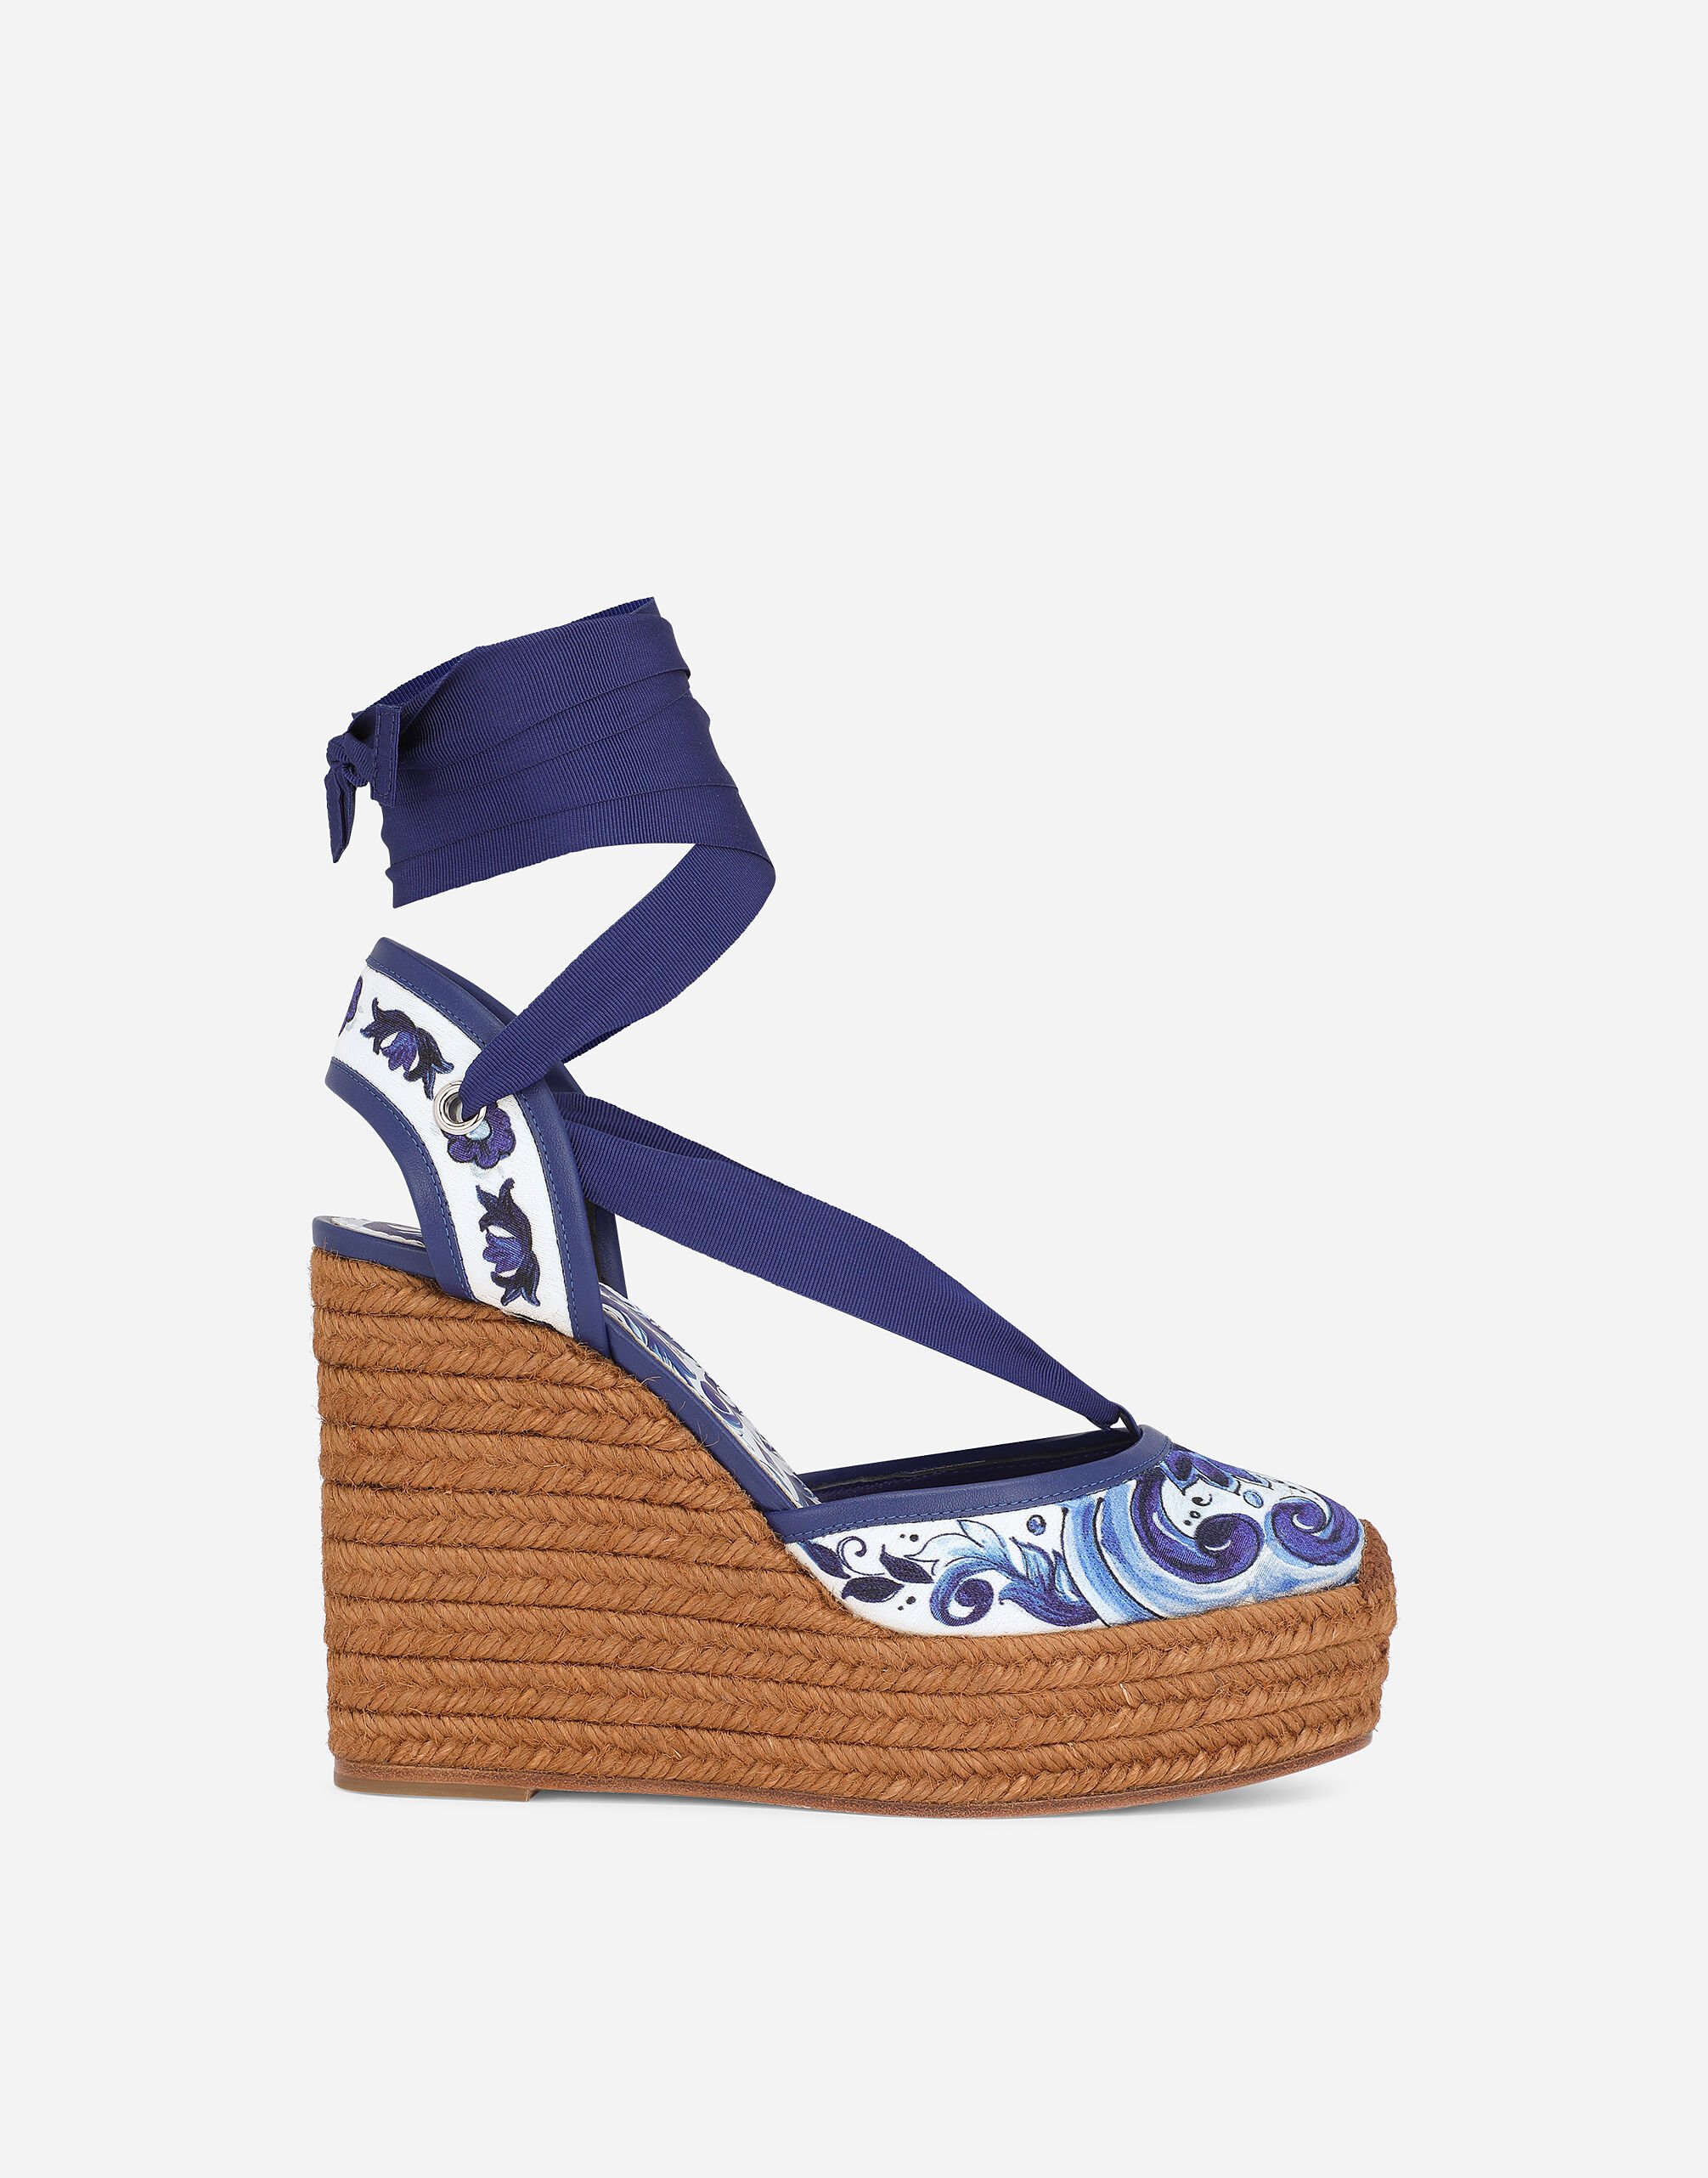 Dolce & Gabbana Rope-soled wedges in printed brocade fabric Multicolor CR1686AQ774